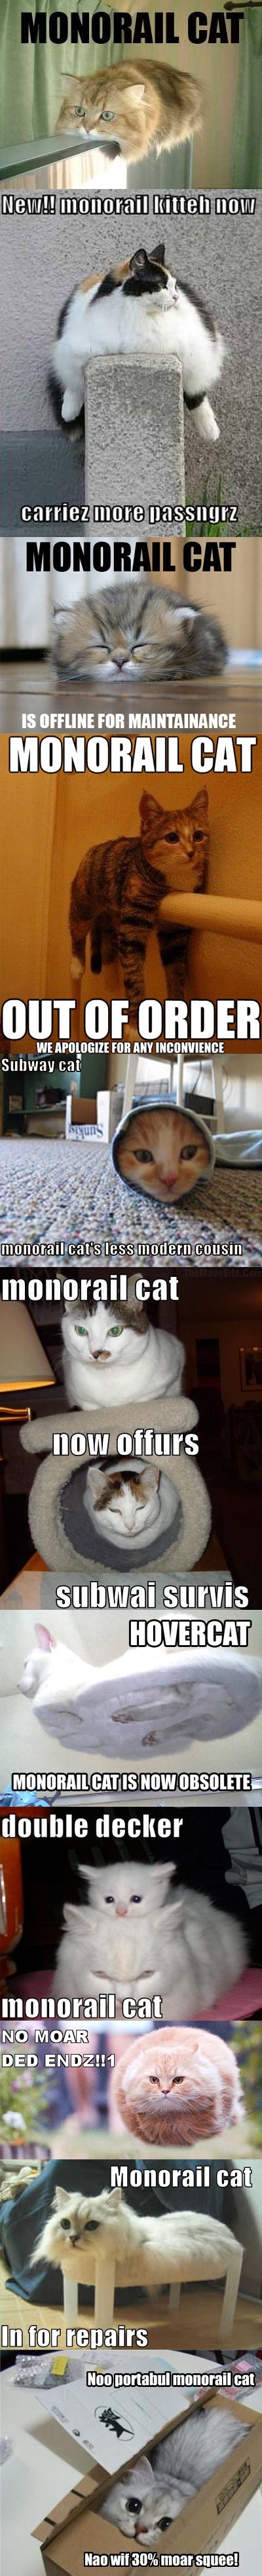 Monorail Cats